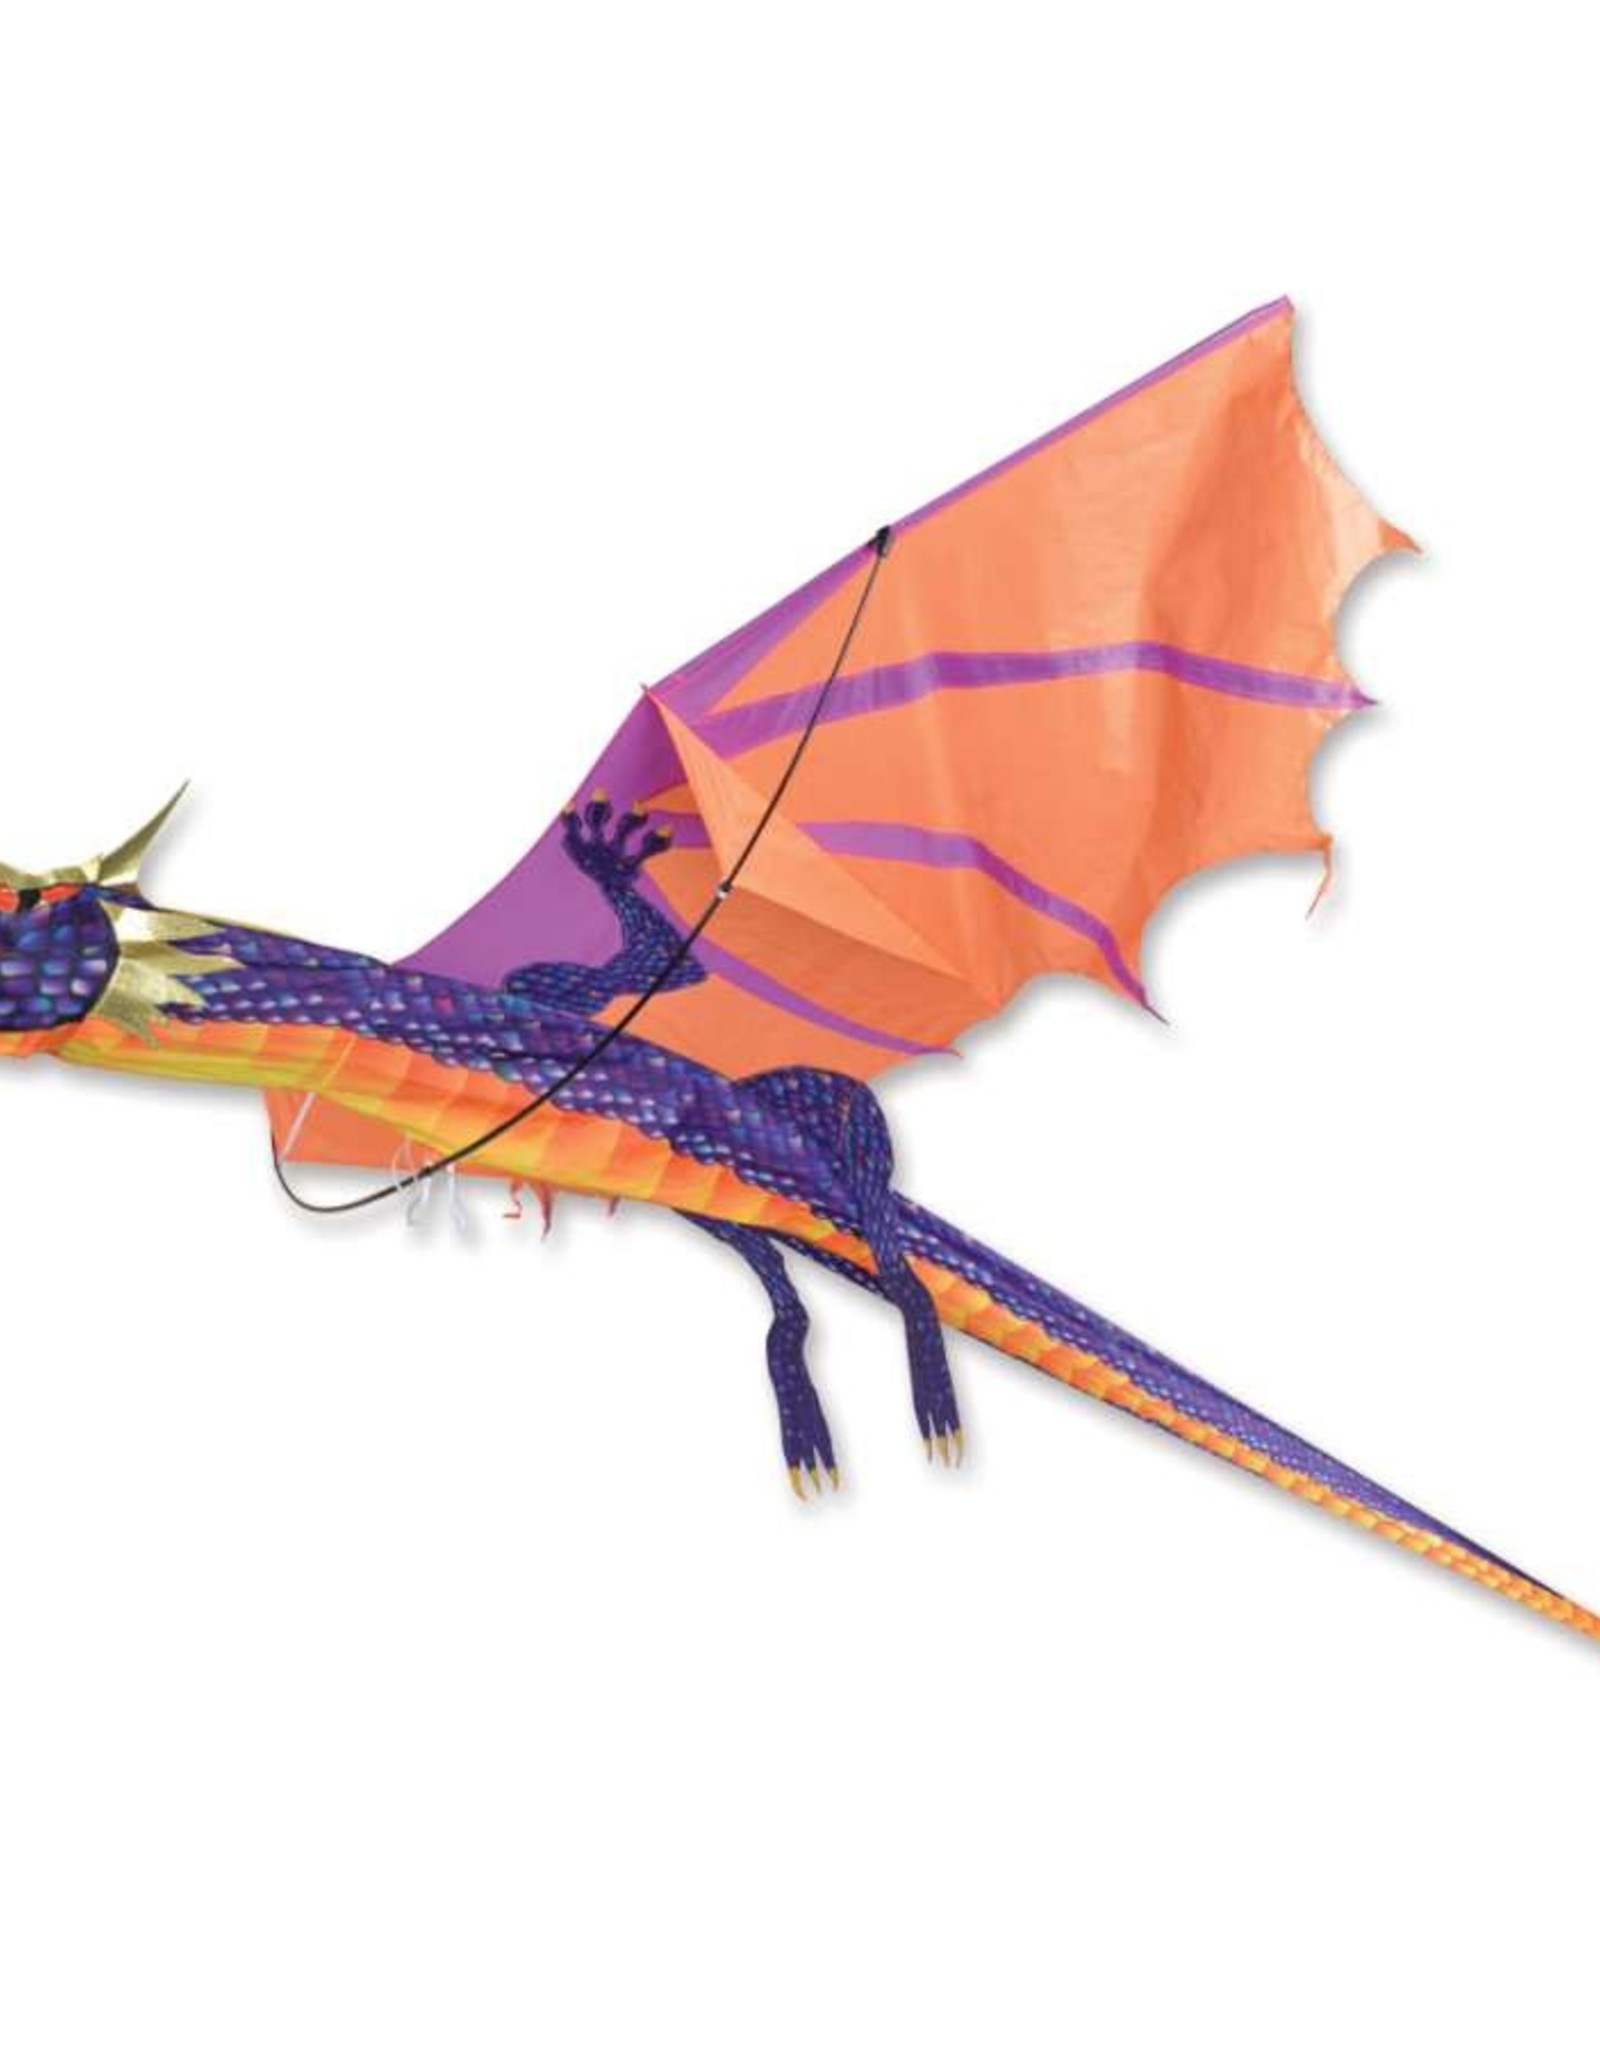 Premier Kites 3D DRAGON - SUNSET KITE *Not available for shipping. Pick up only.